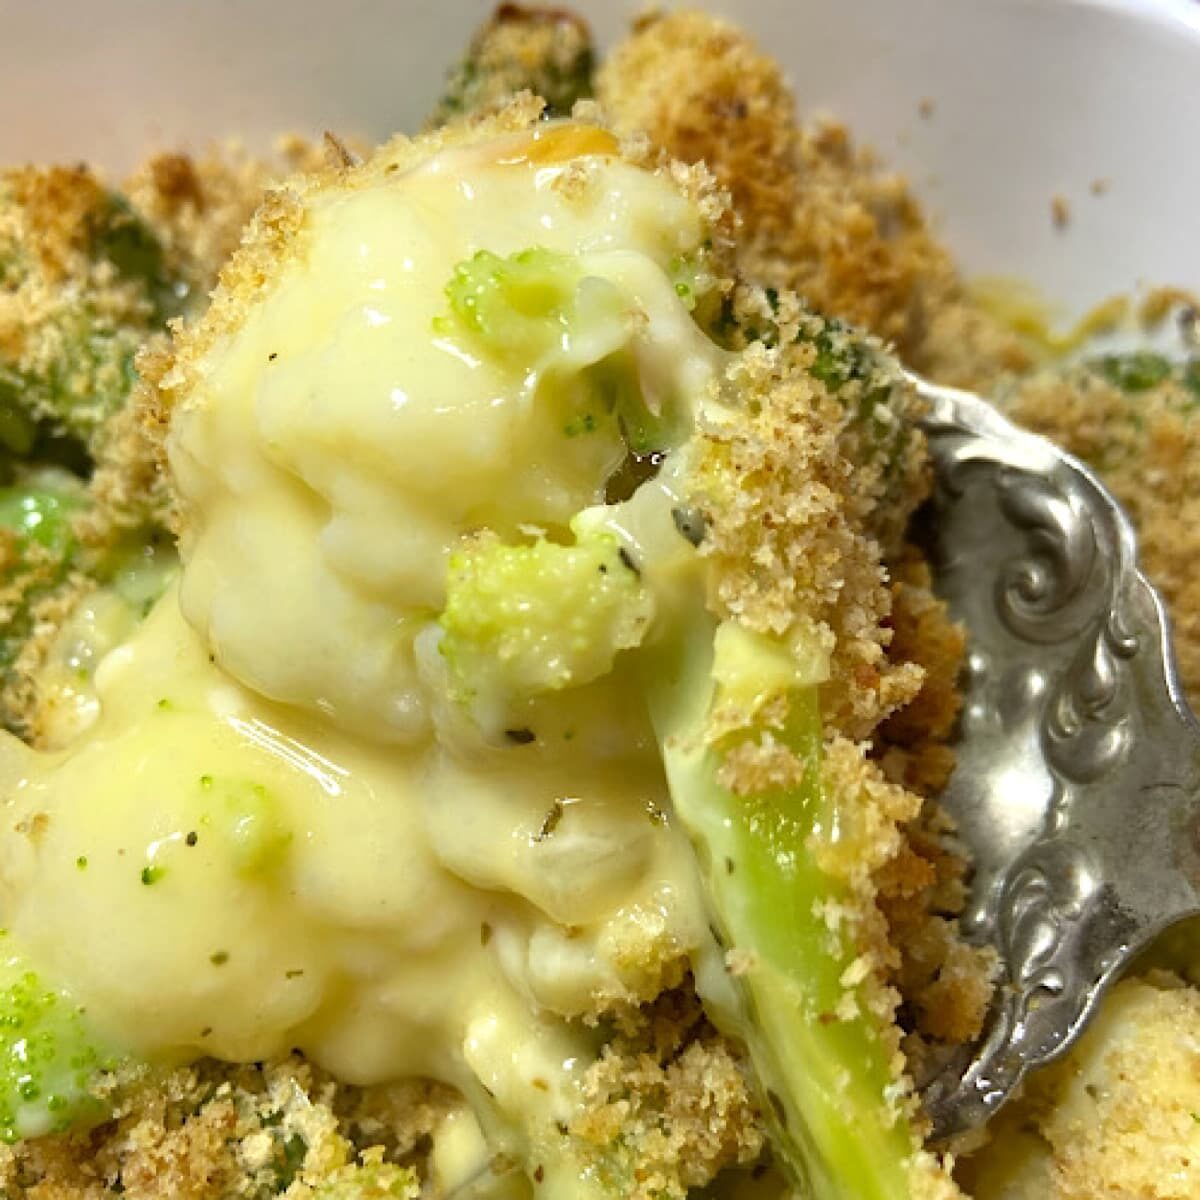 broccoli in cheese sauce with bread crumbs